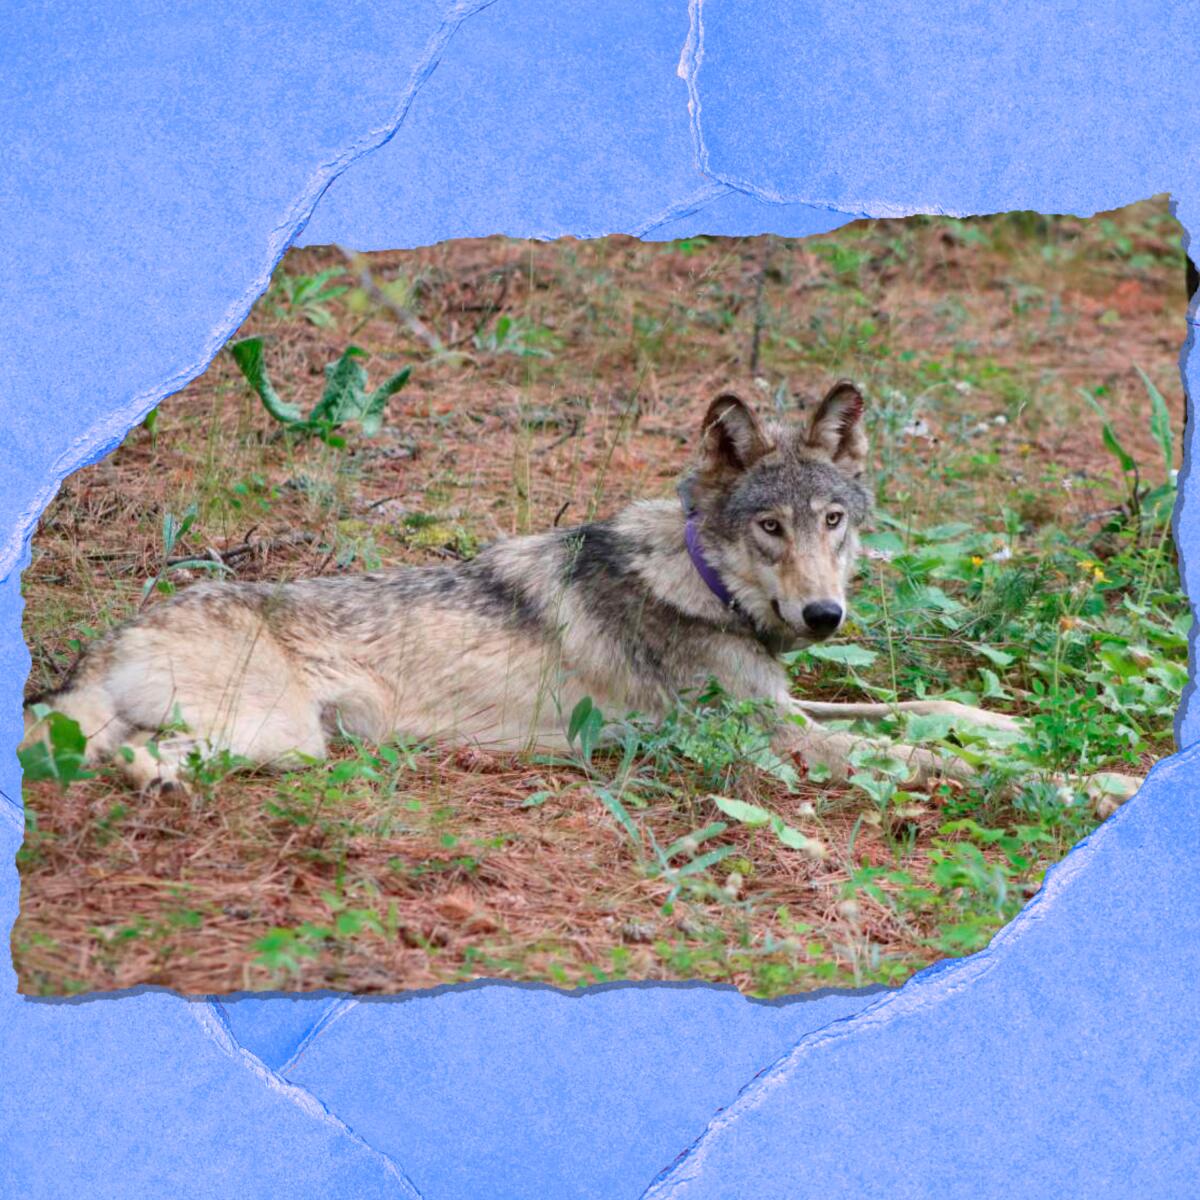 A gray wolf lies among plants in the scrub brush.